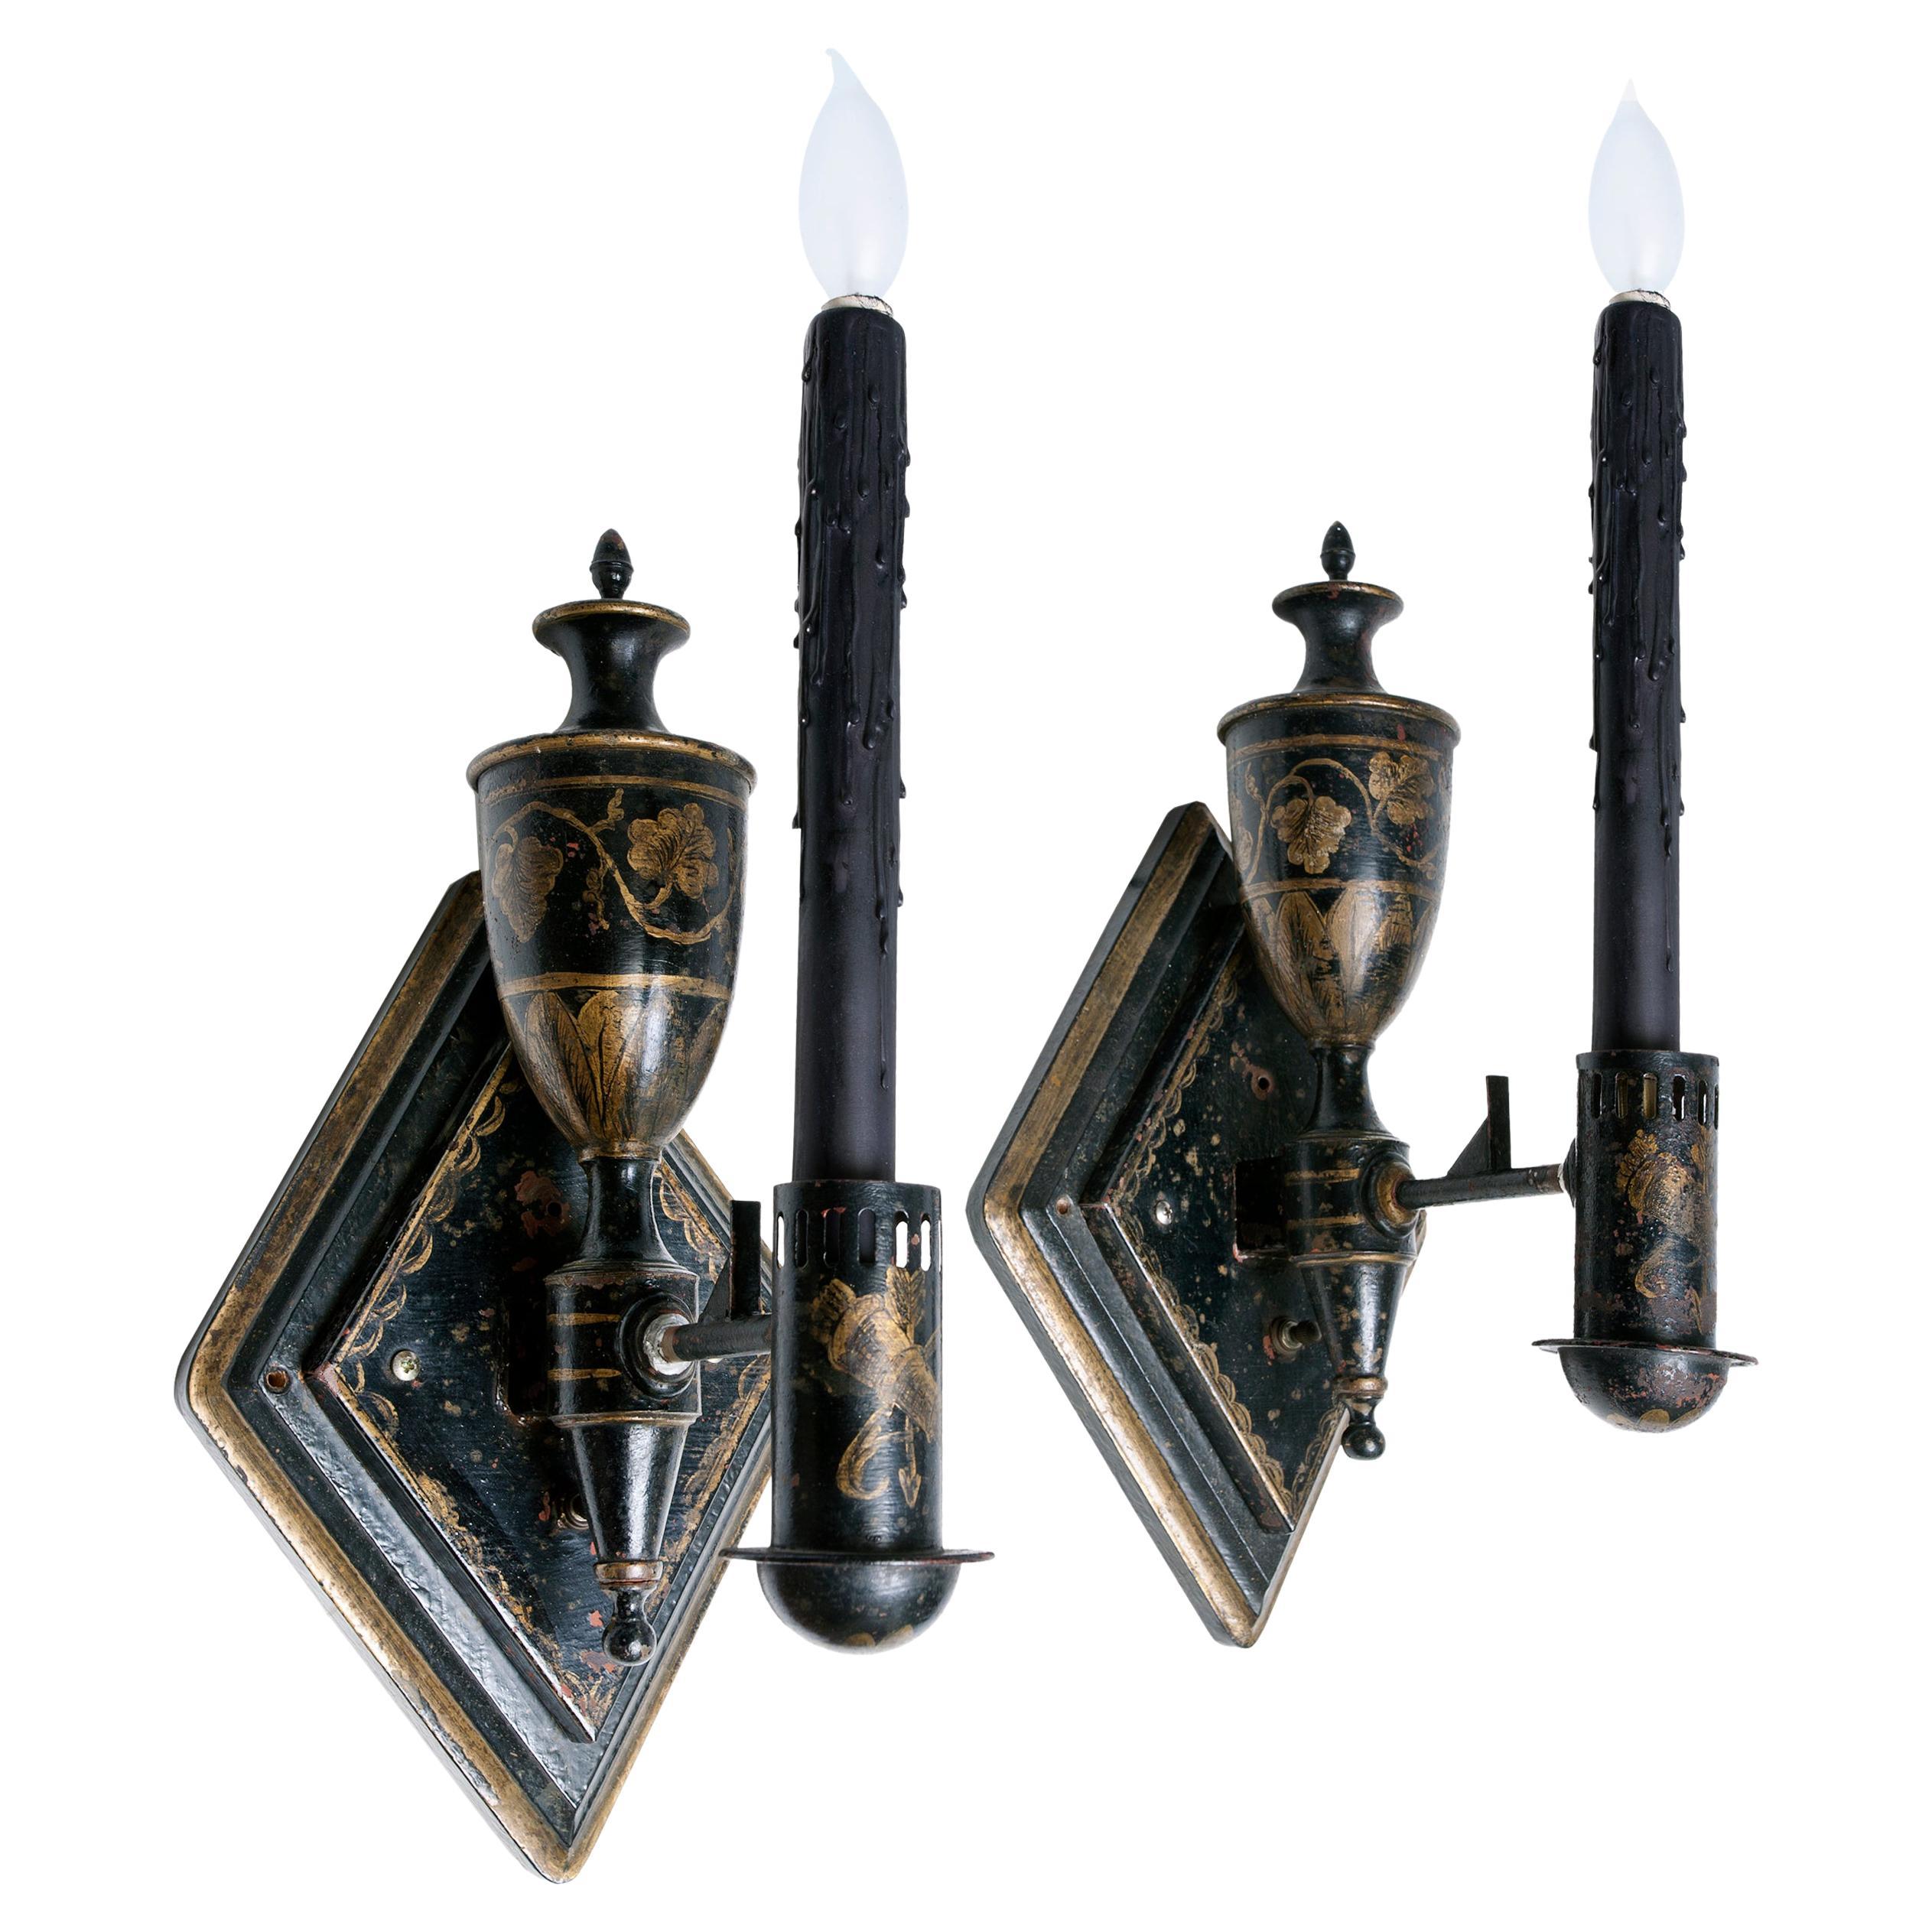 A pair of diamond shaped Italian painted sconces. Newly rewired ready for hardwiring. Custom finished ebony candle covers. The silk shades are not included.